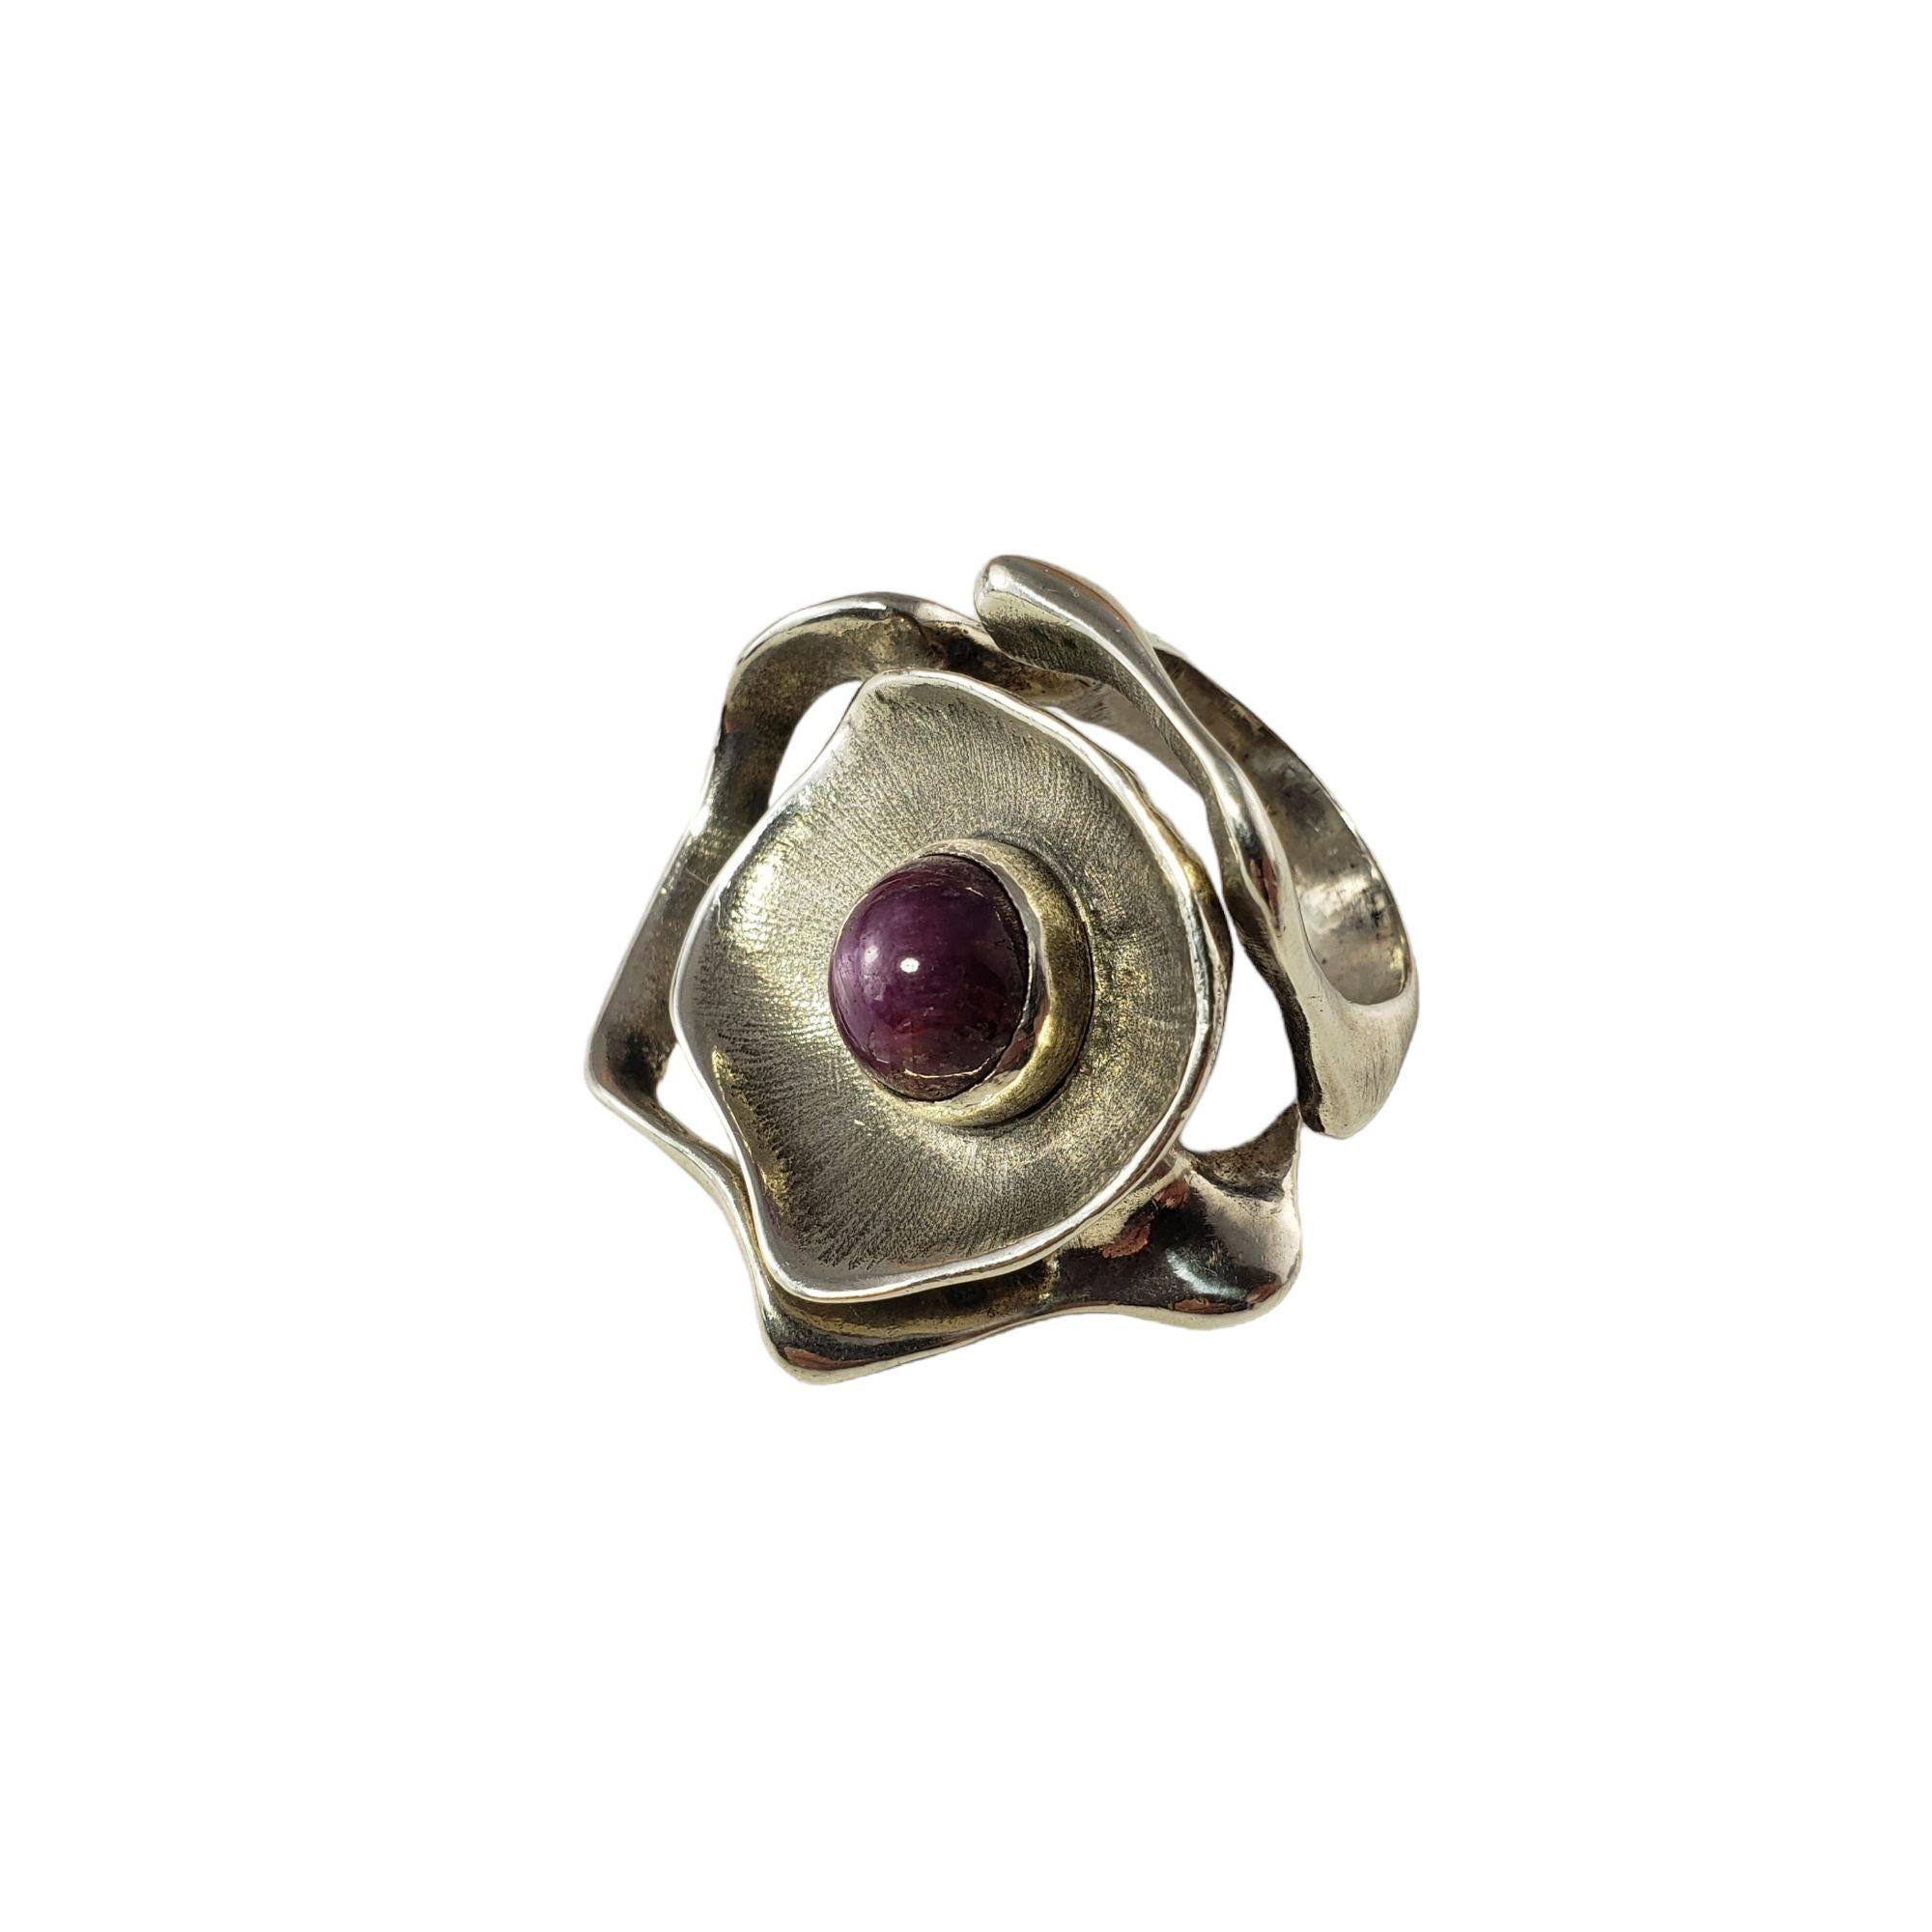 Vintage Sterling Silver and Cabochon Garnet Ring Size 5.5 GAI Certified-

This stunning ring features one round cabochon garnet (9 mm) set in beautifully detailed sterling silver. Width: 32 mm.
Shank: 5 mm.

Garnet weight: 5.84 ct.

Ring Size: